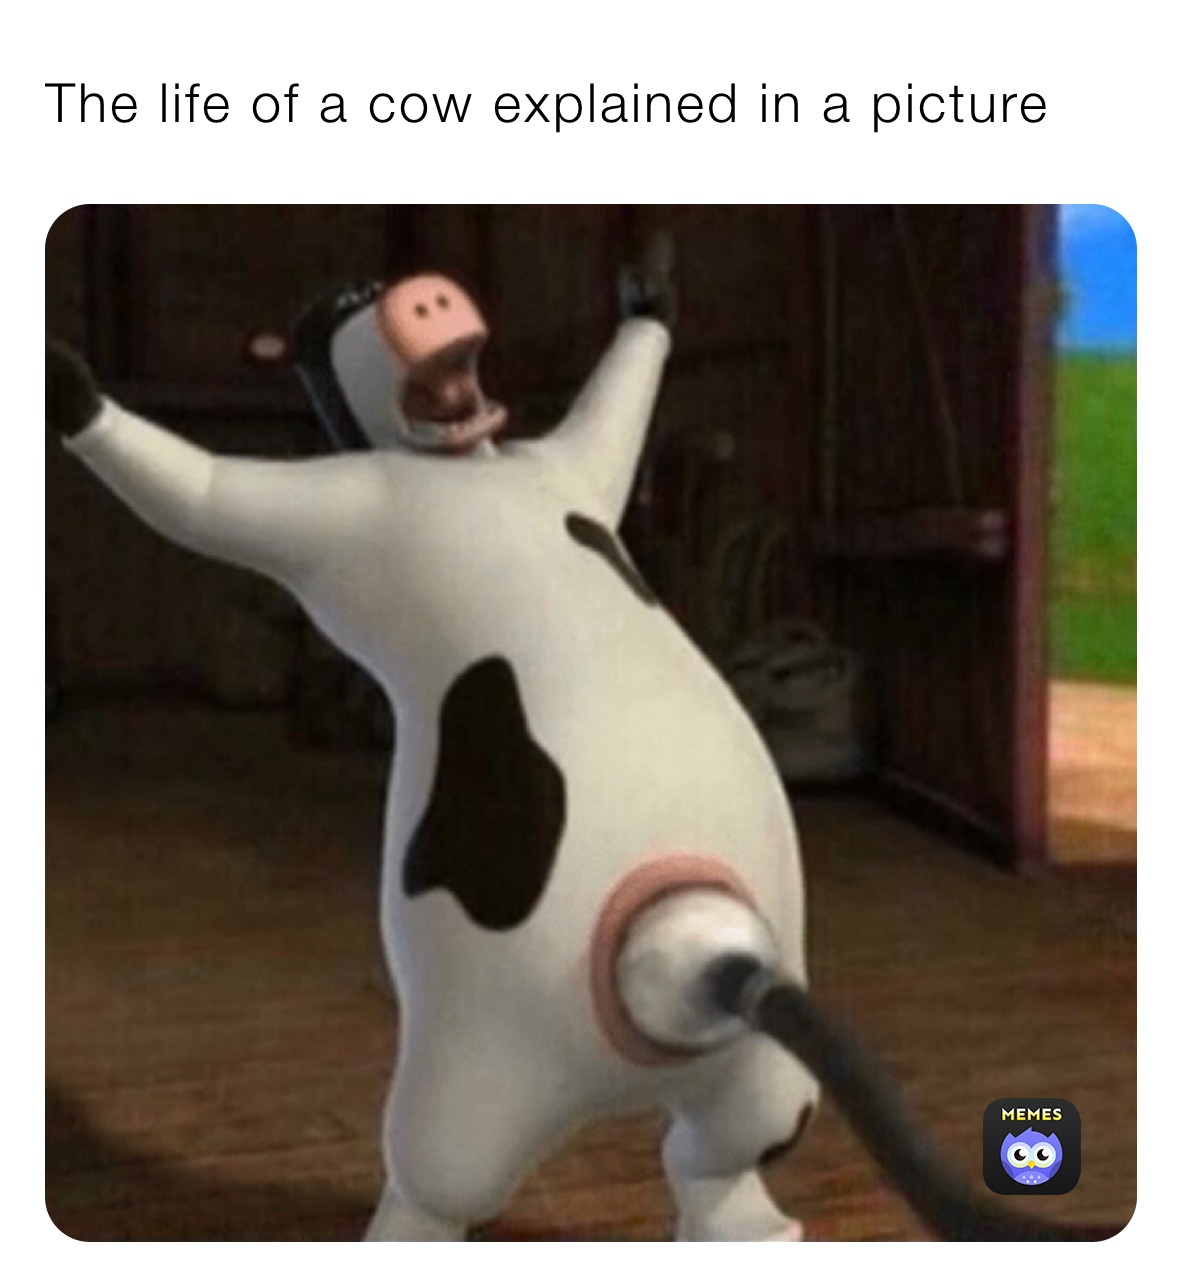 The life of a cow explained in a picture